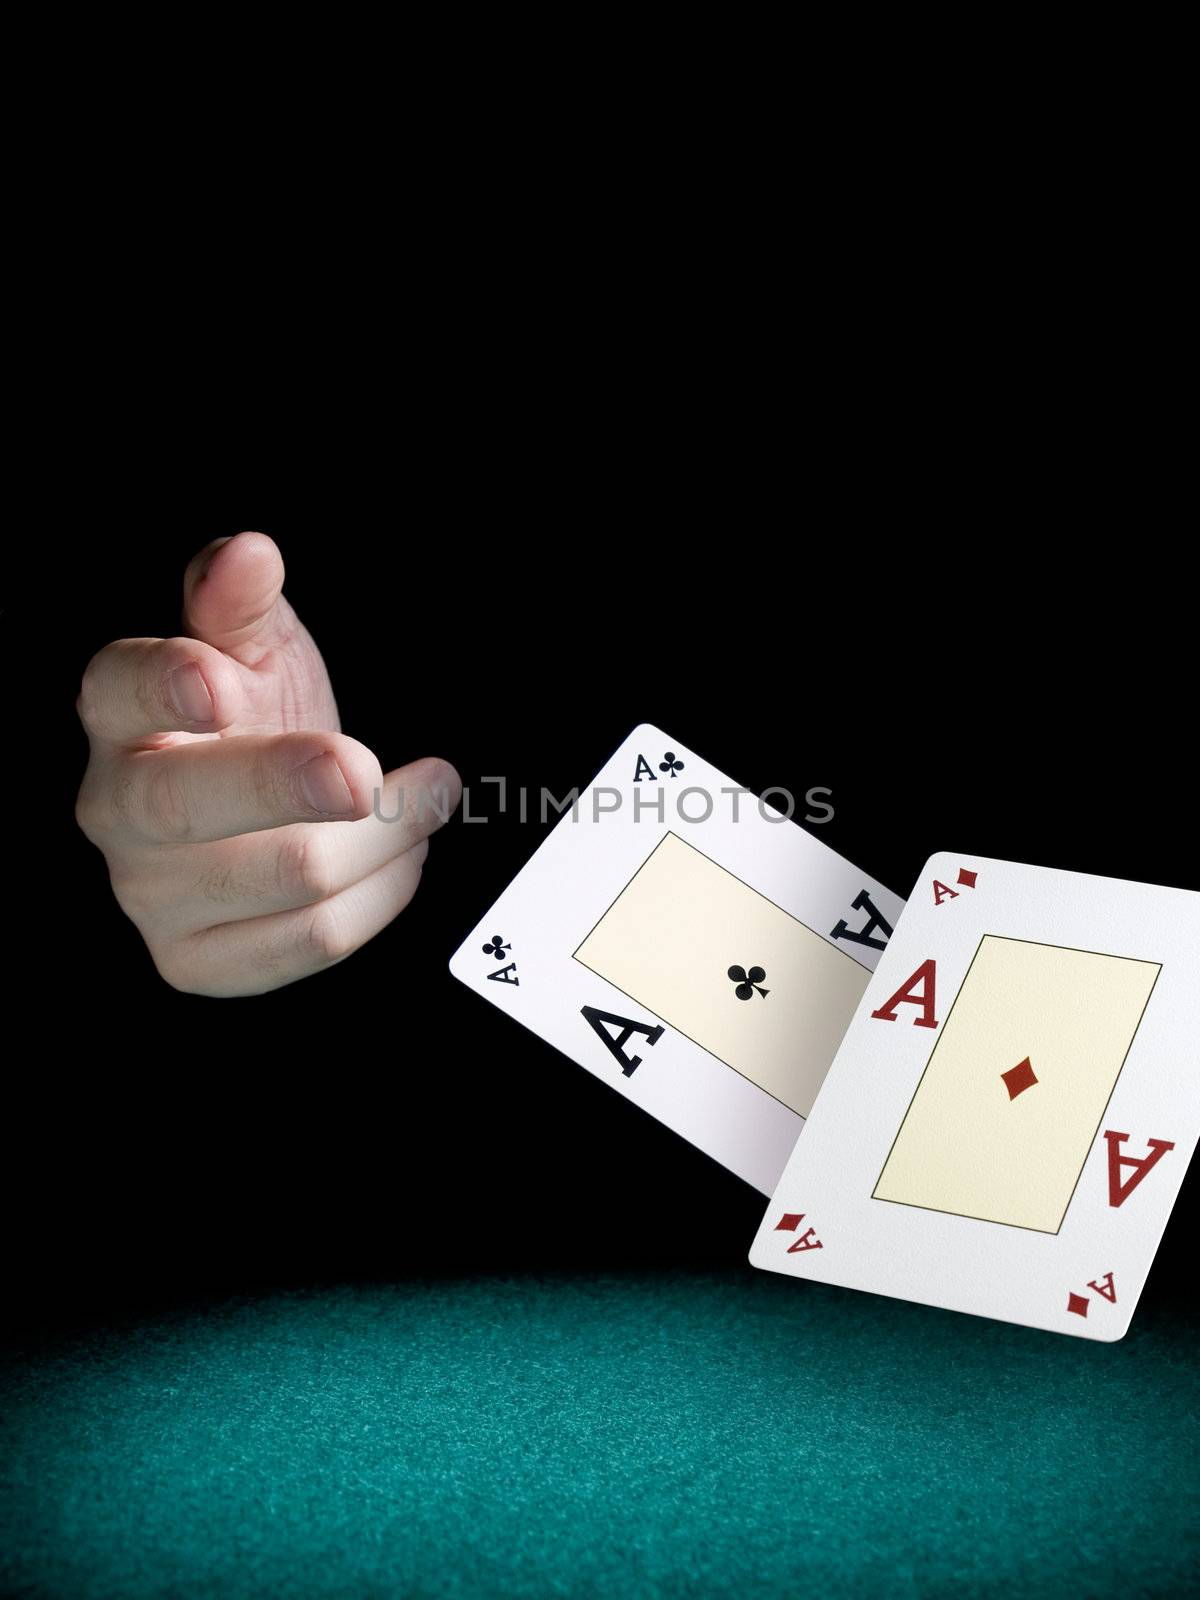 A man's hand throwing two aces over a green felt.